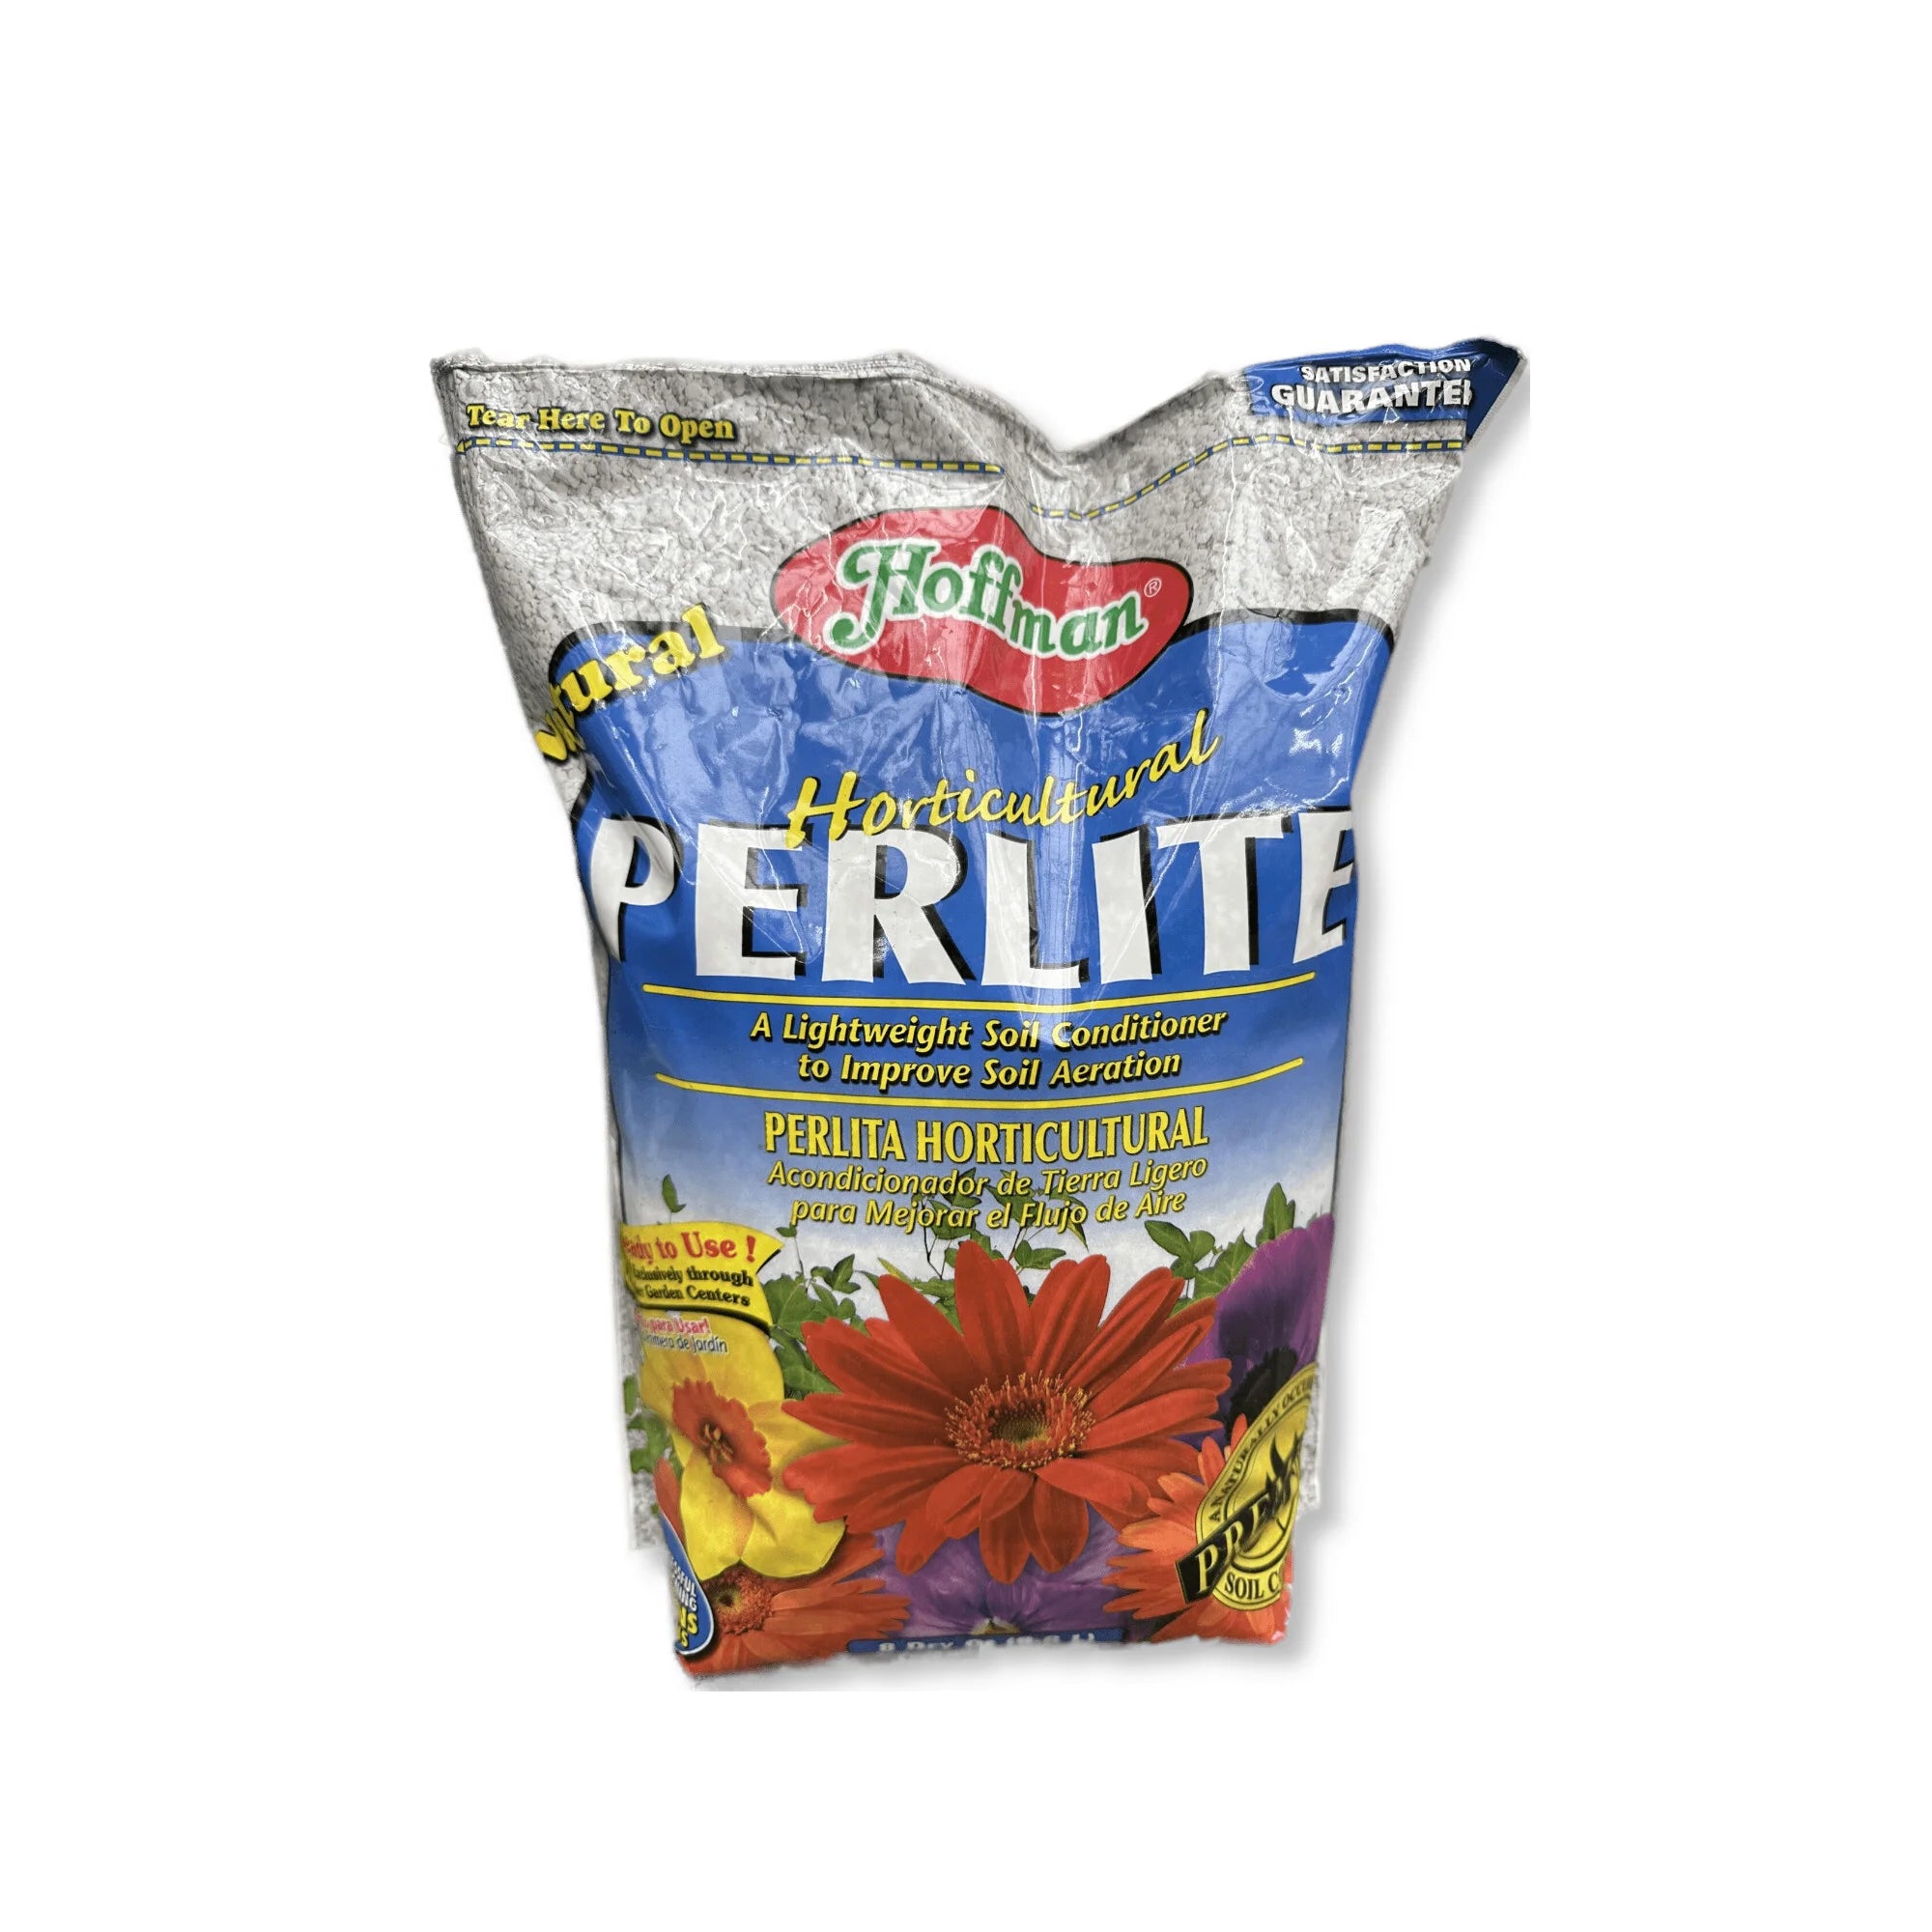 Perlite is a great soil conditioner to add to potting soils, raised beds, seed starting mixes and storing bulbs 